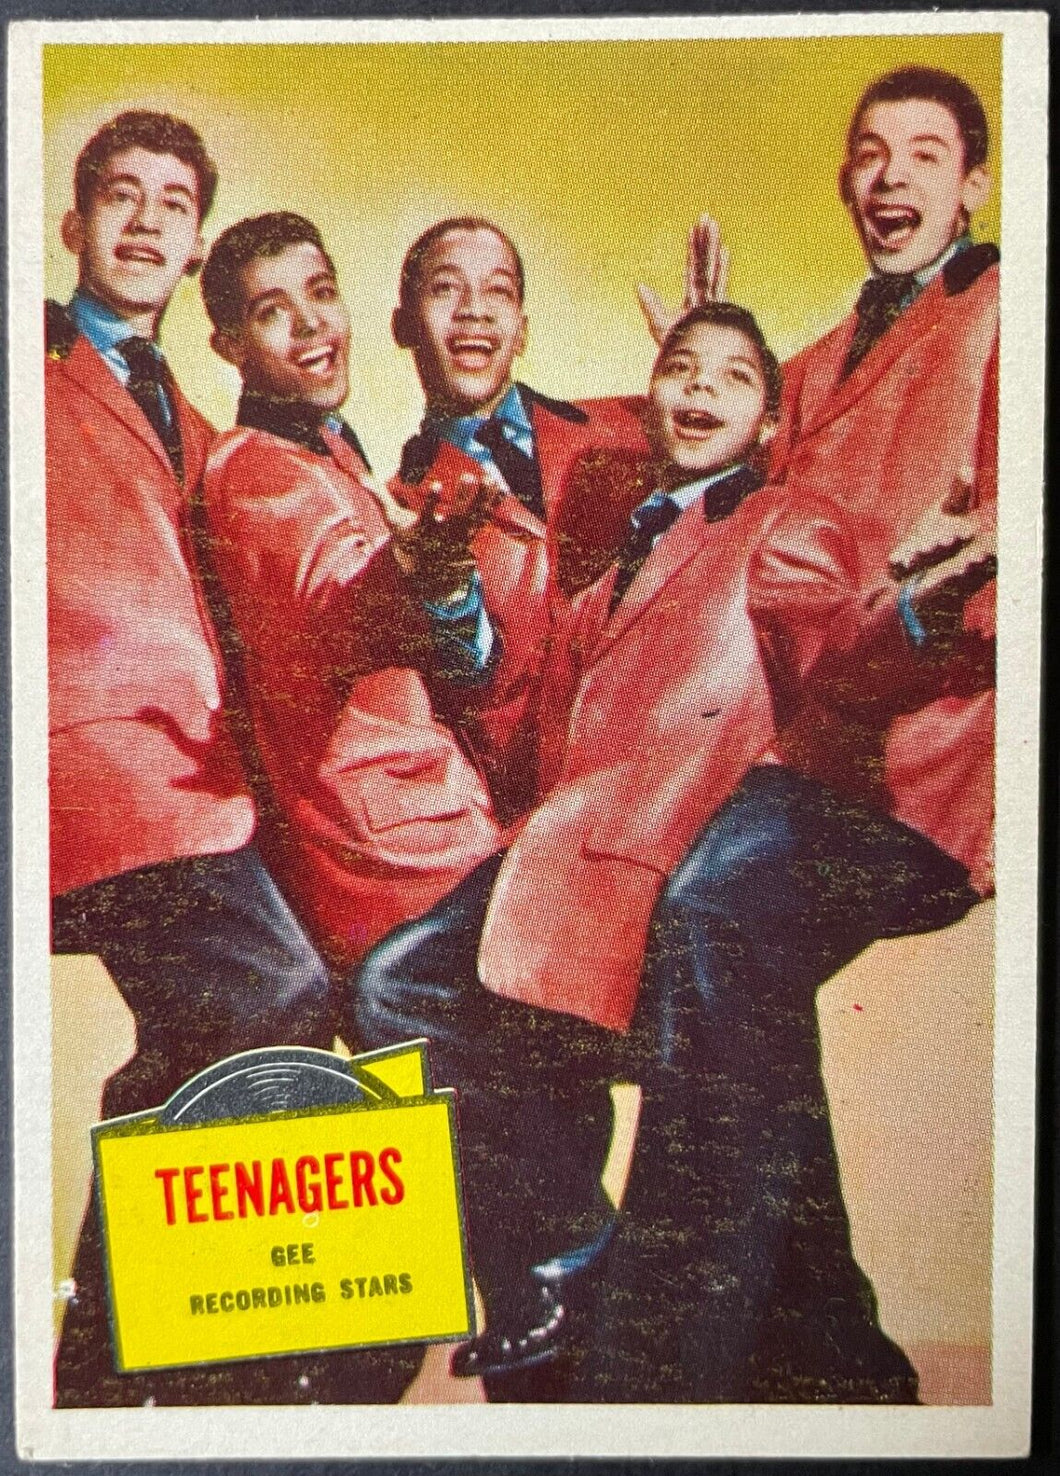 1957 Topps Hit Stars Trading Card Teenagers #18 Non Sports Vintage